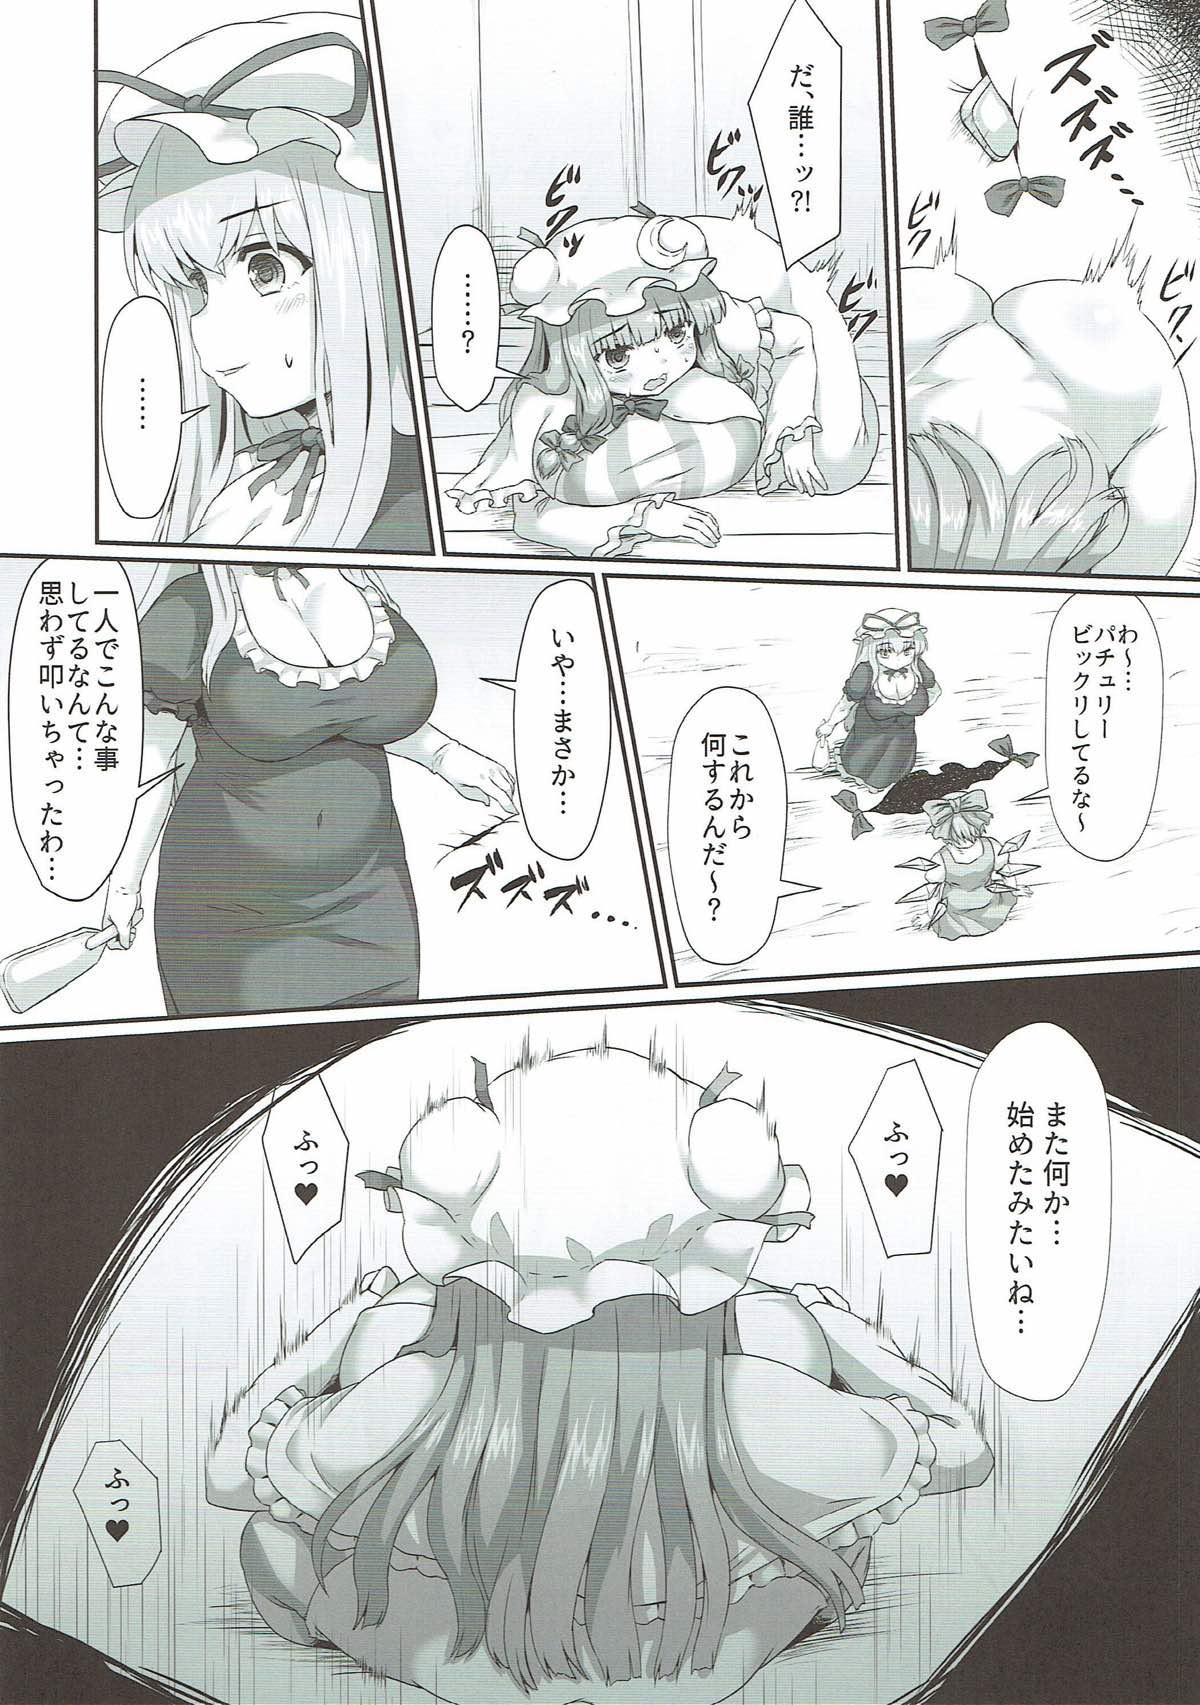 Super Hot Porn パチュリーの尻穴本 - Touhou project Fist - Page 5